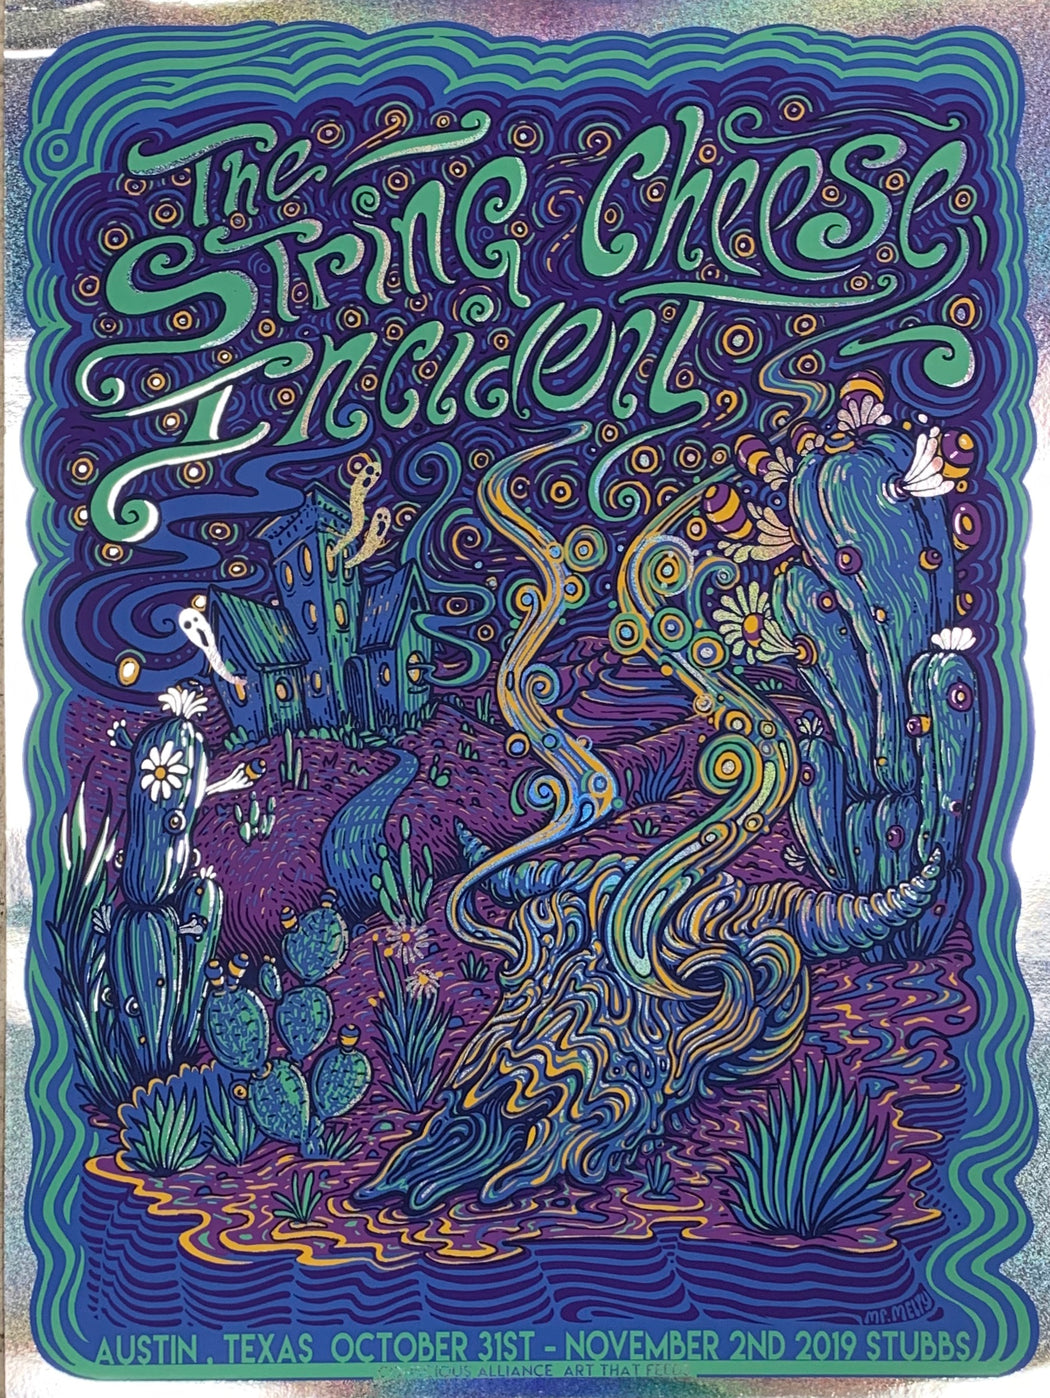 String Cheese Incident Austin - 2019